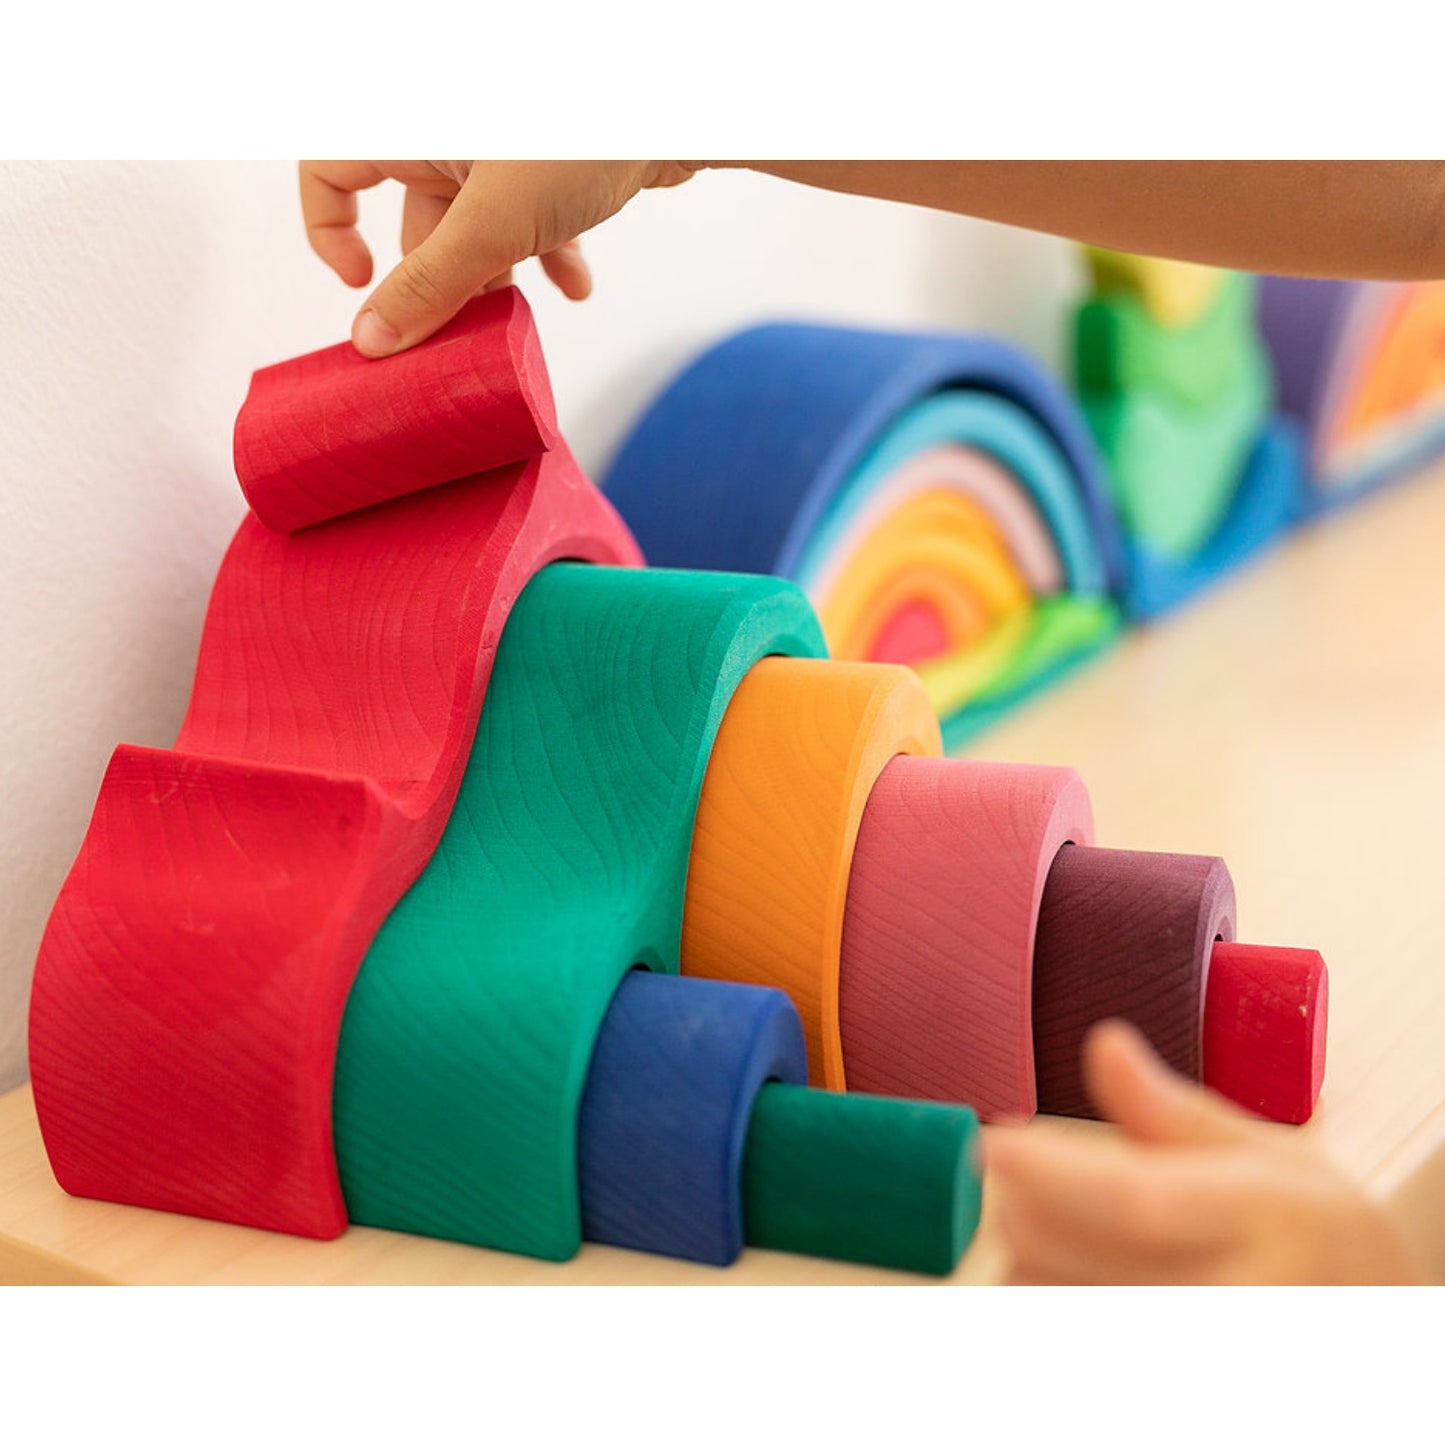 Gluckskafer Red Wooden Gable House Stacker | Imaginative Play Wooden Toys | | Waldorf Education and Montessori Education | Lifestyle: Child Playing with Toy | BeoVERDE.ie